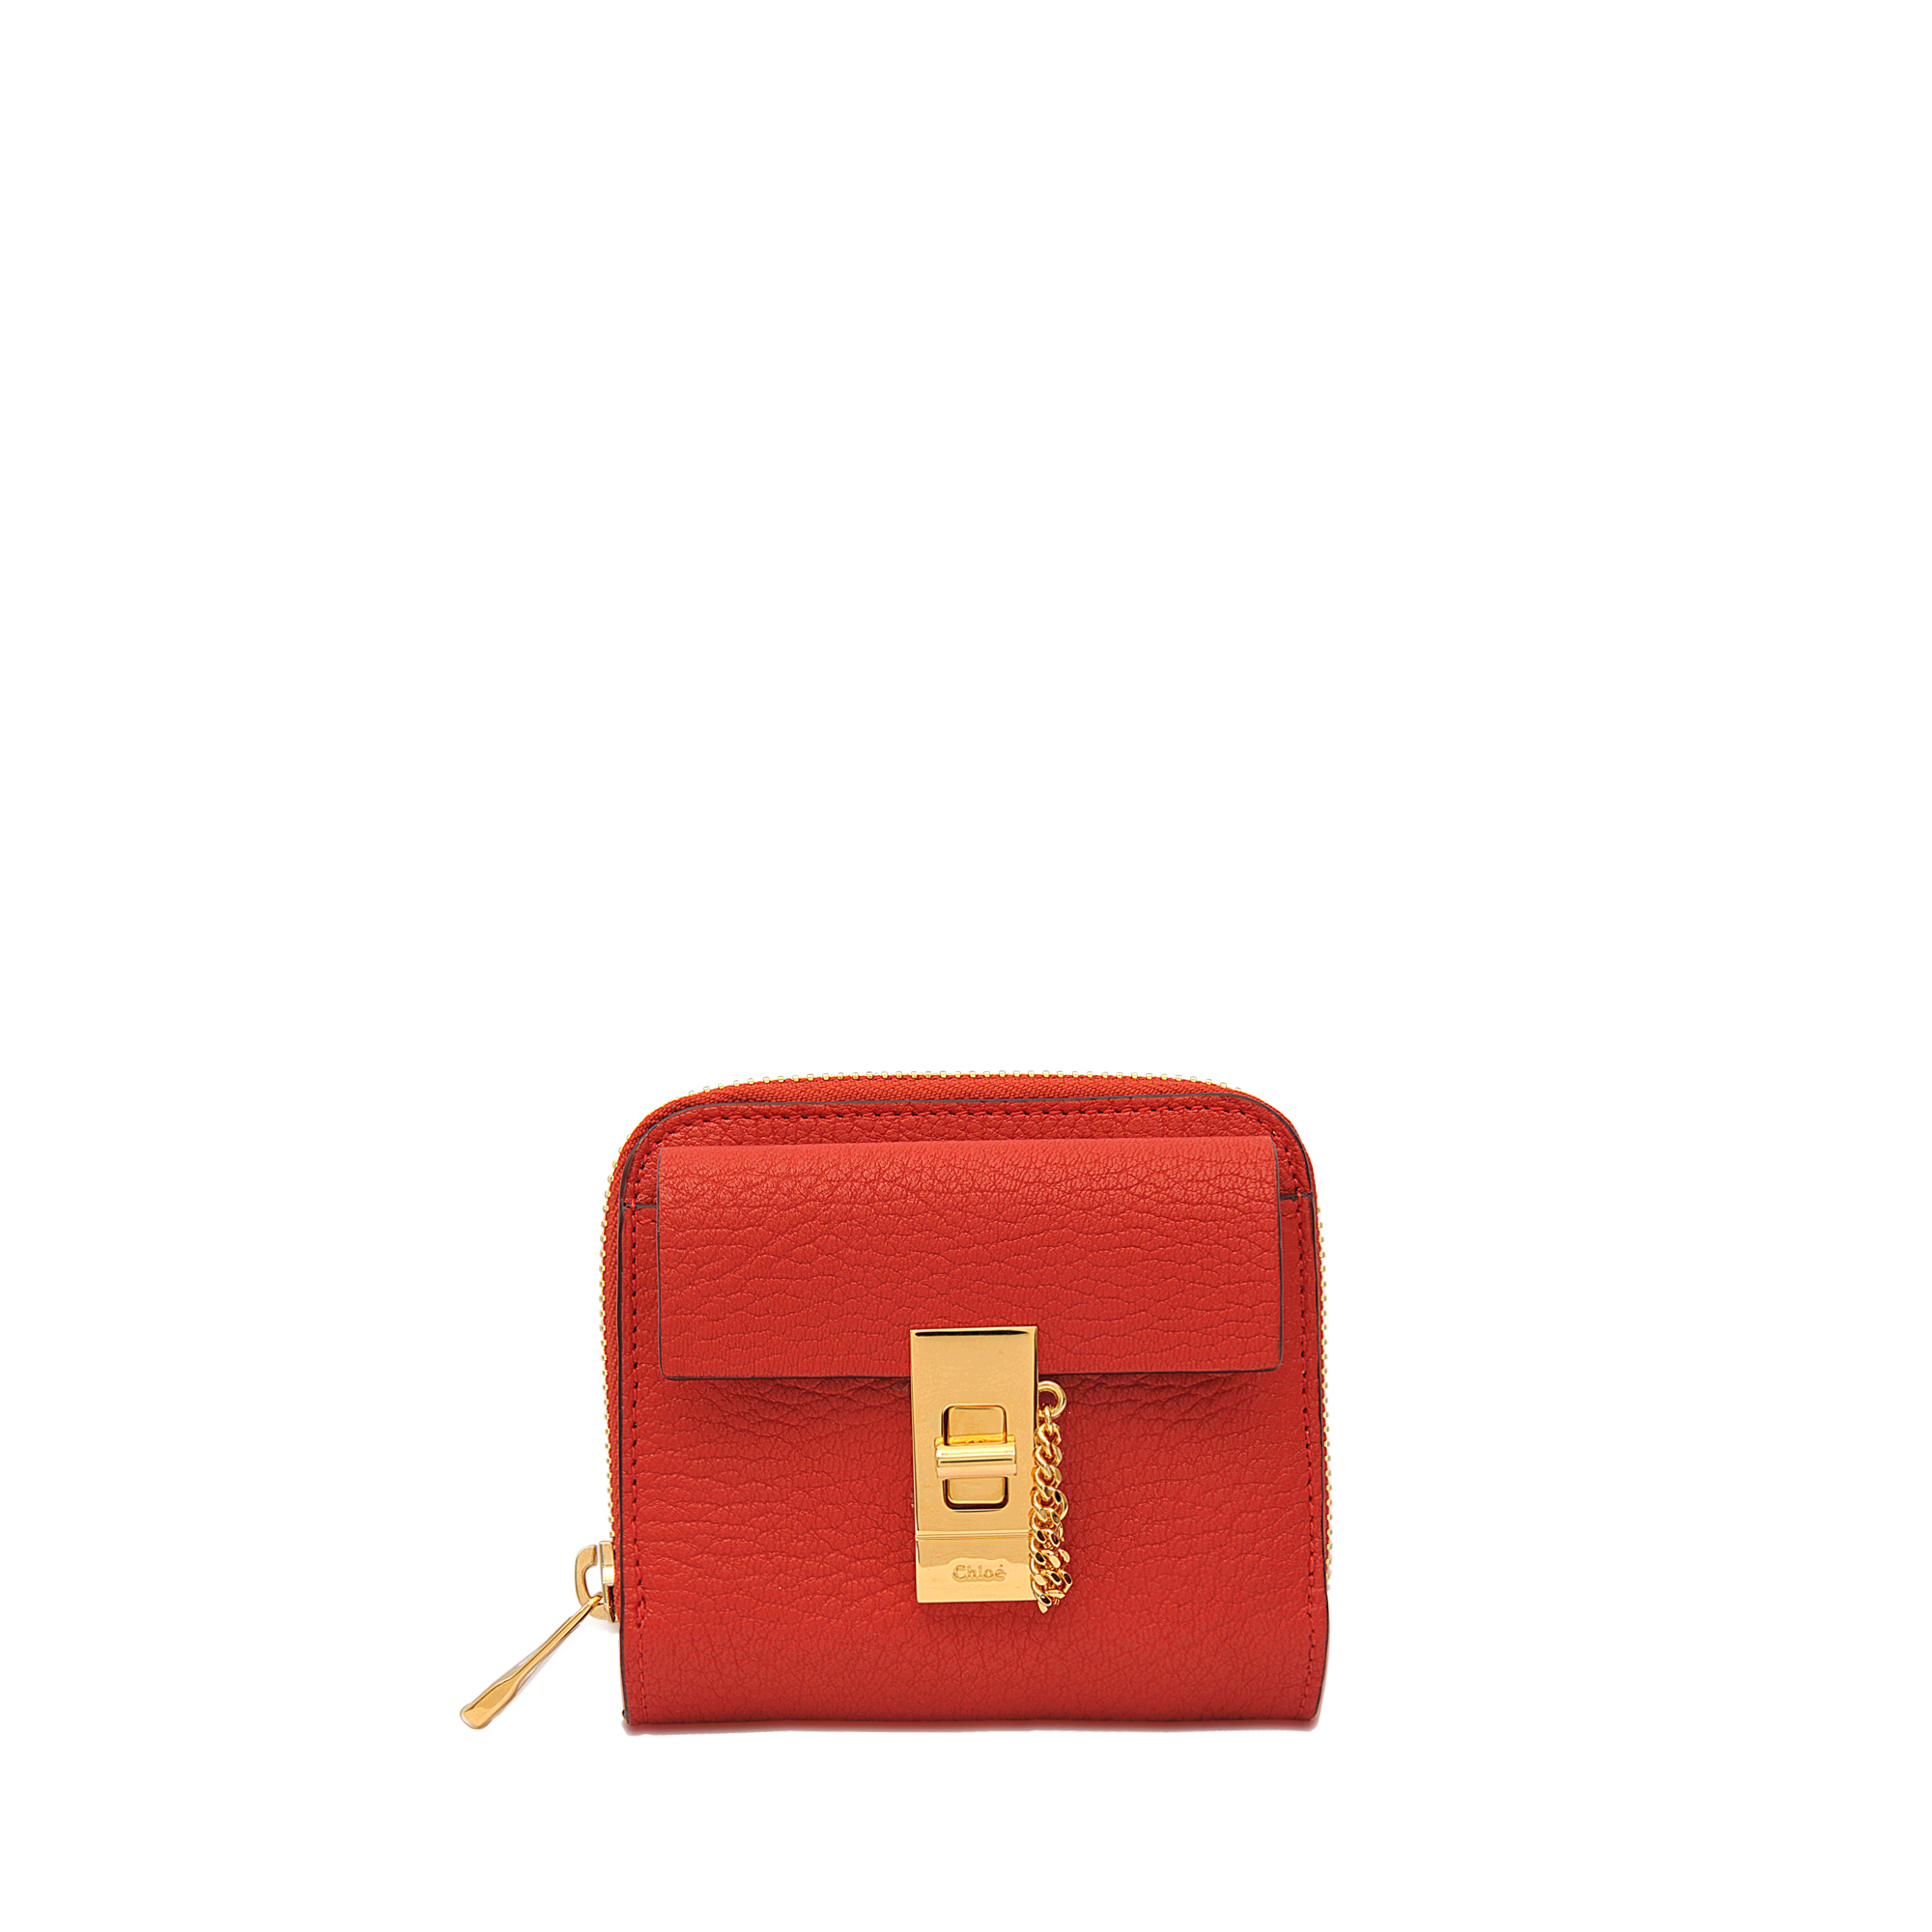 Chlo Drew Square Zipped Wallet in Red | Lyst